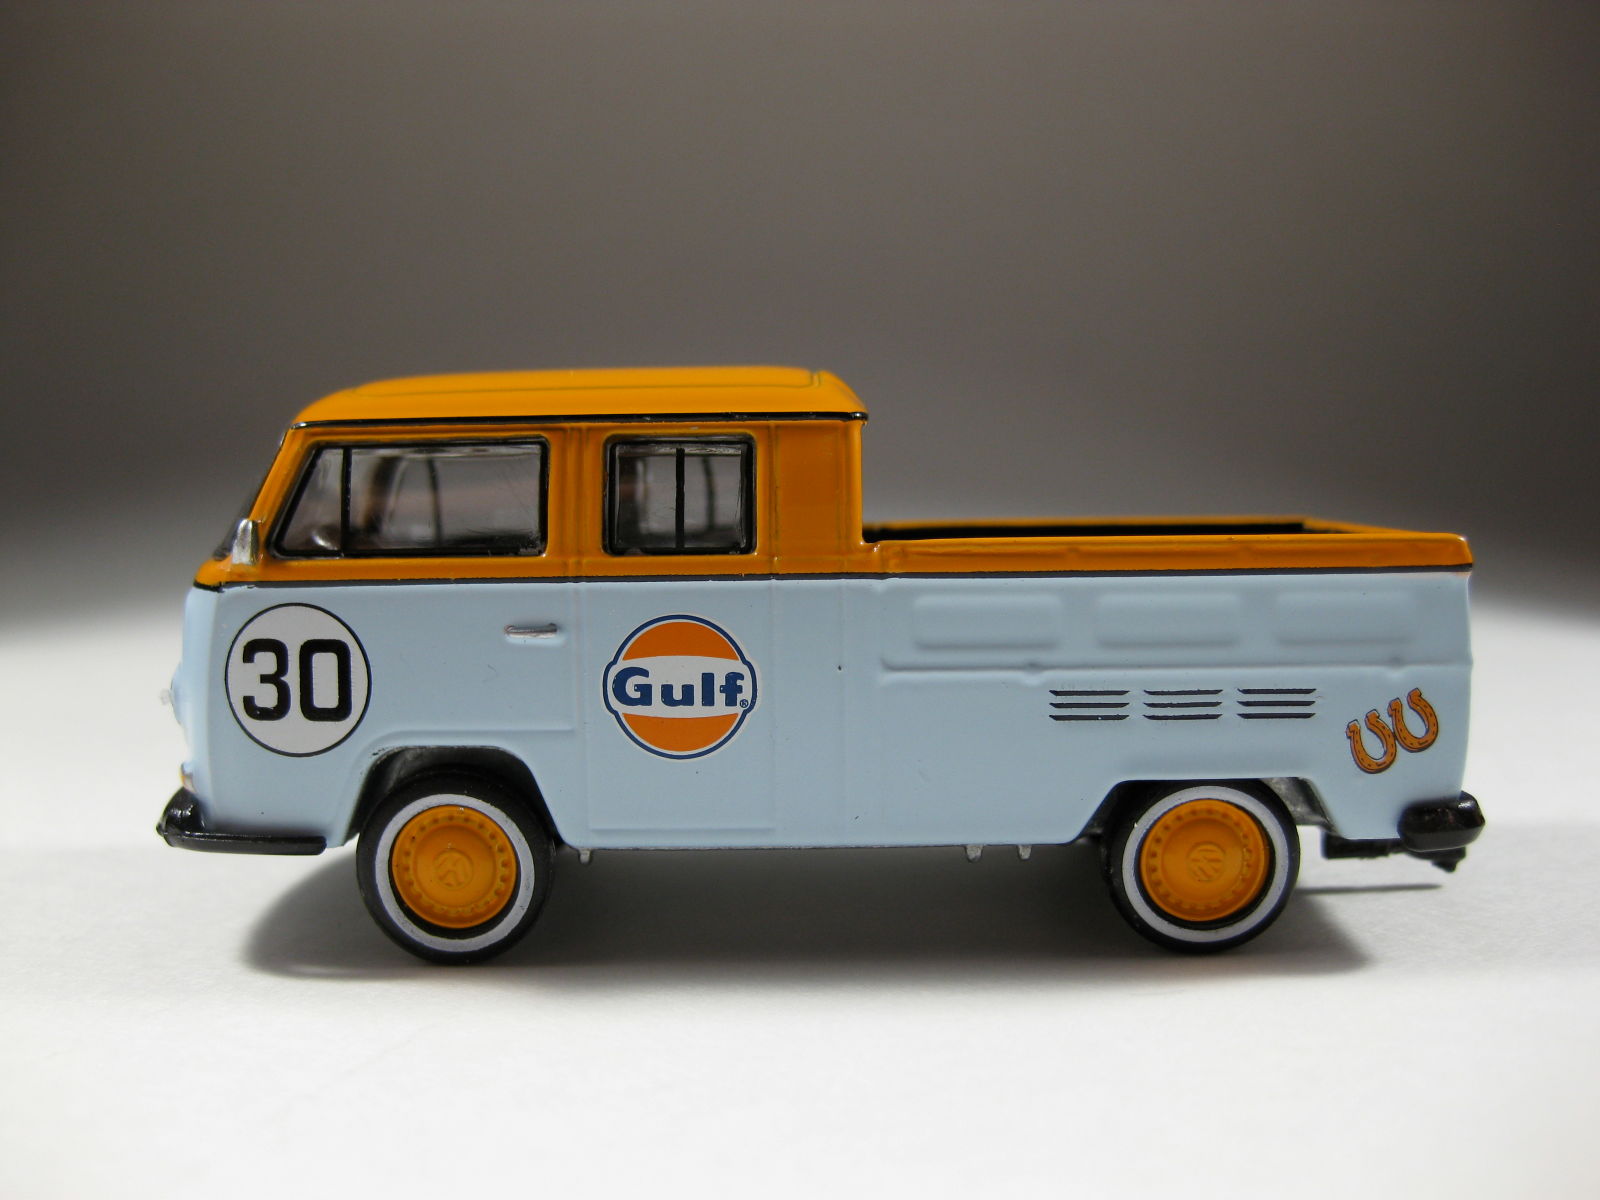 Illustration for article titled VW TYPE 2 CREW CAB + GULF LIVERY = JOY!!